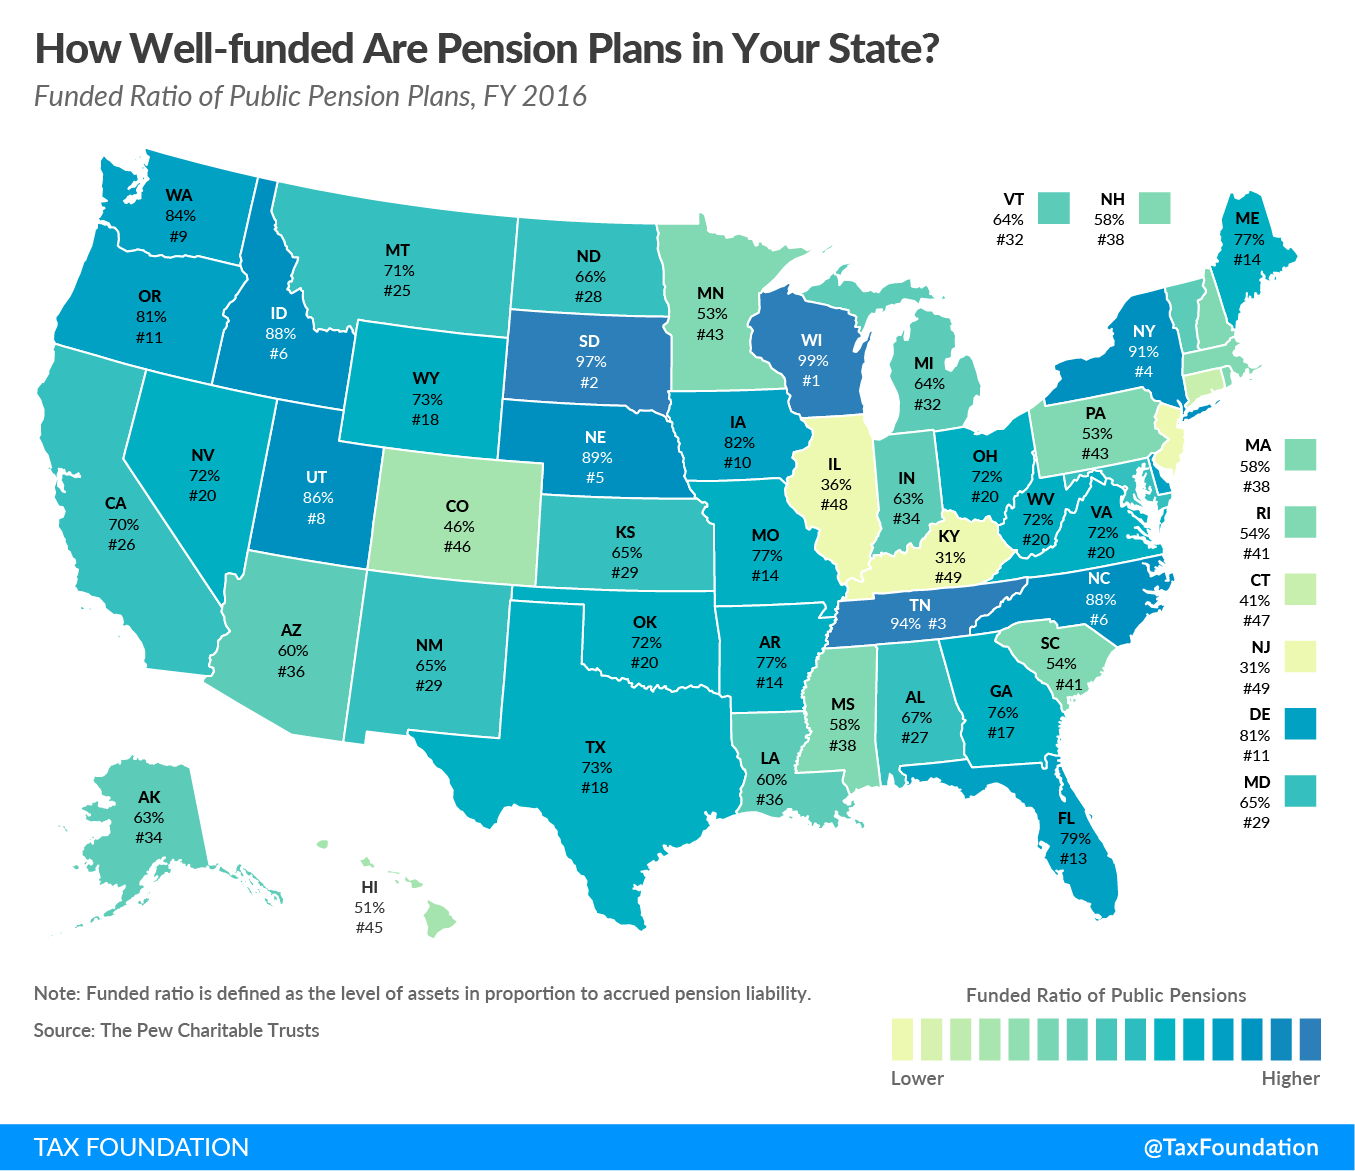 pensions2018-01.png